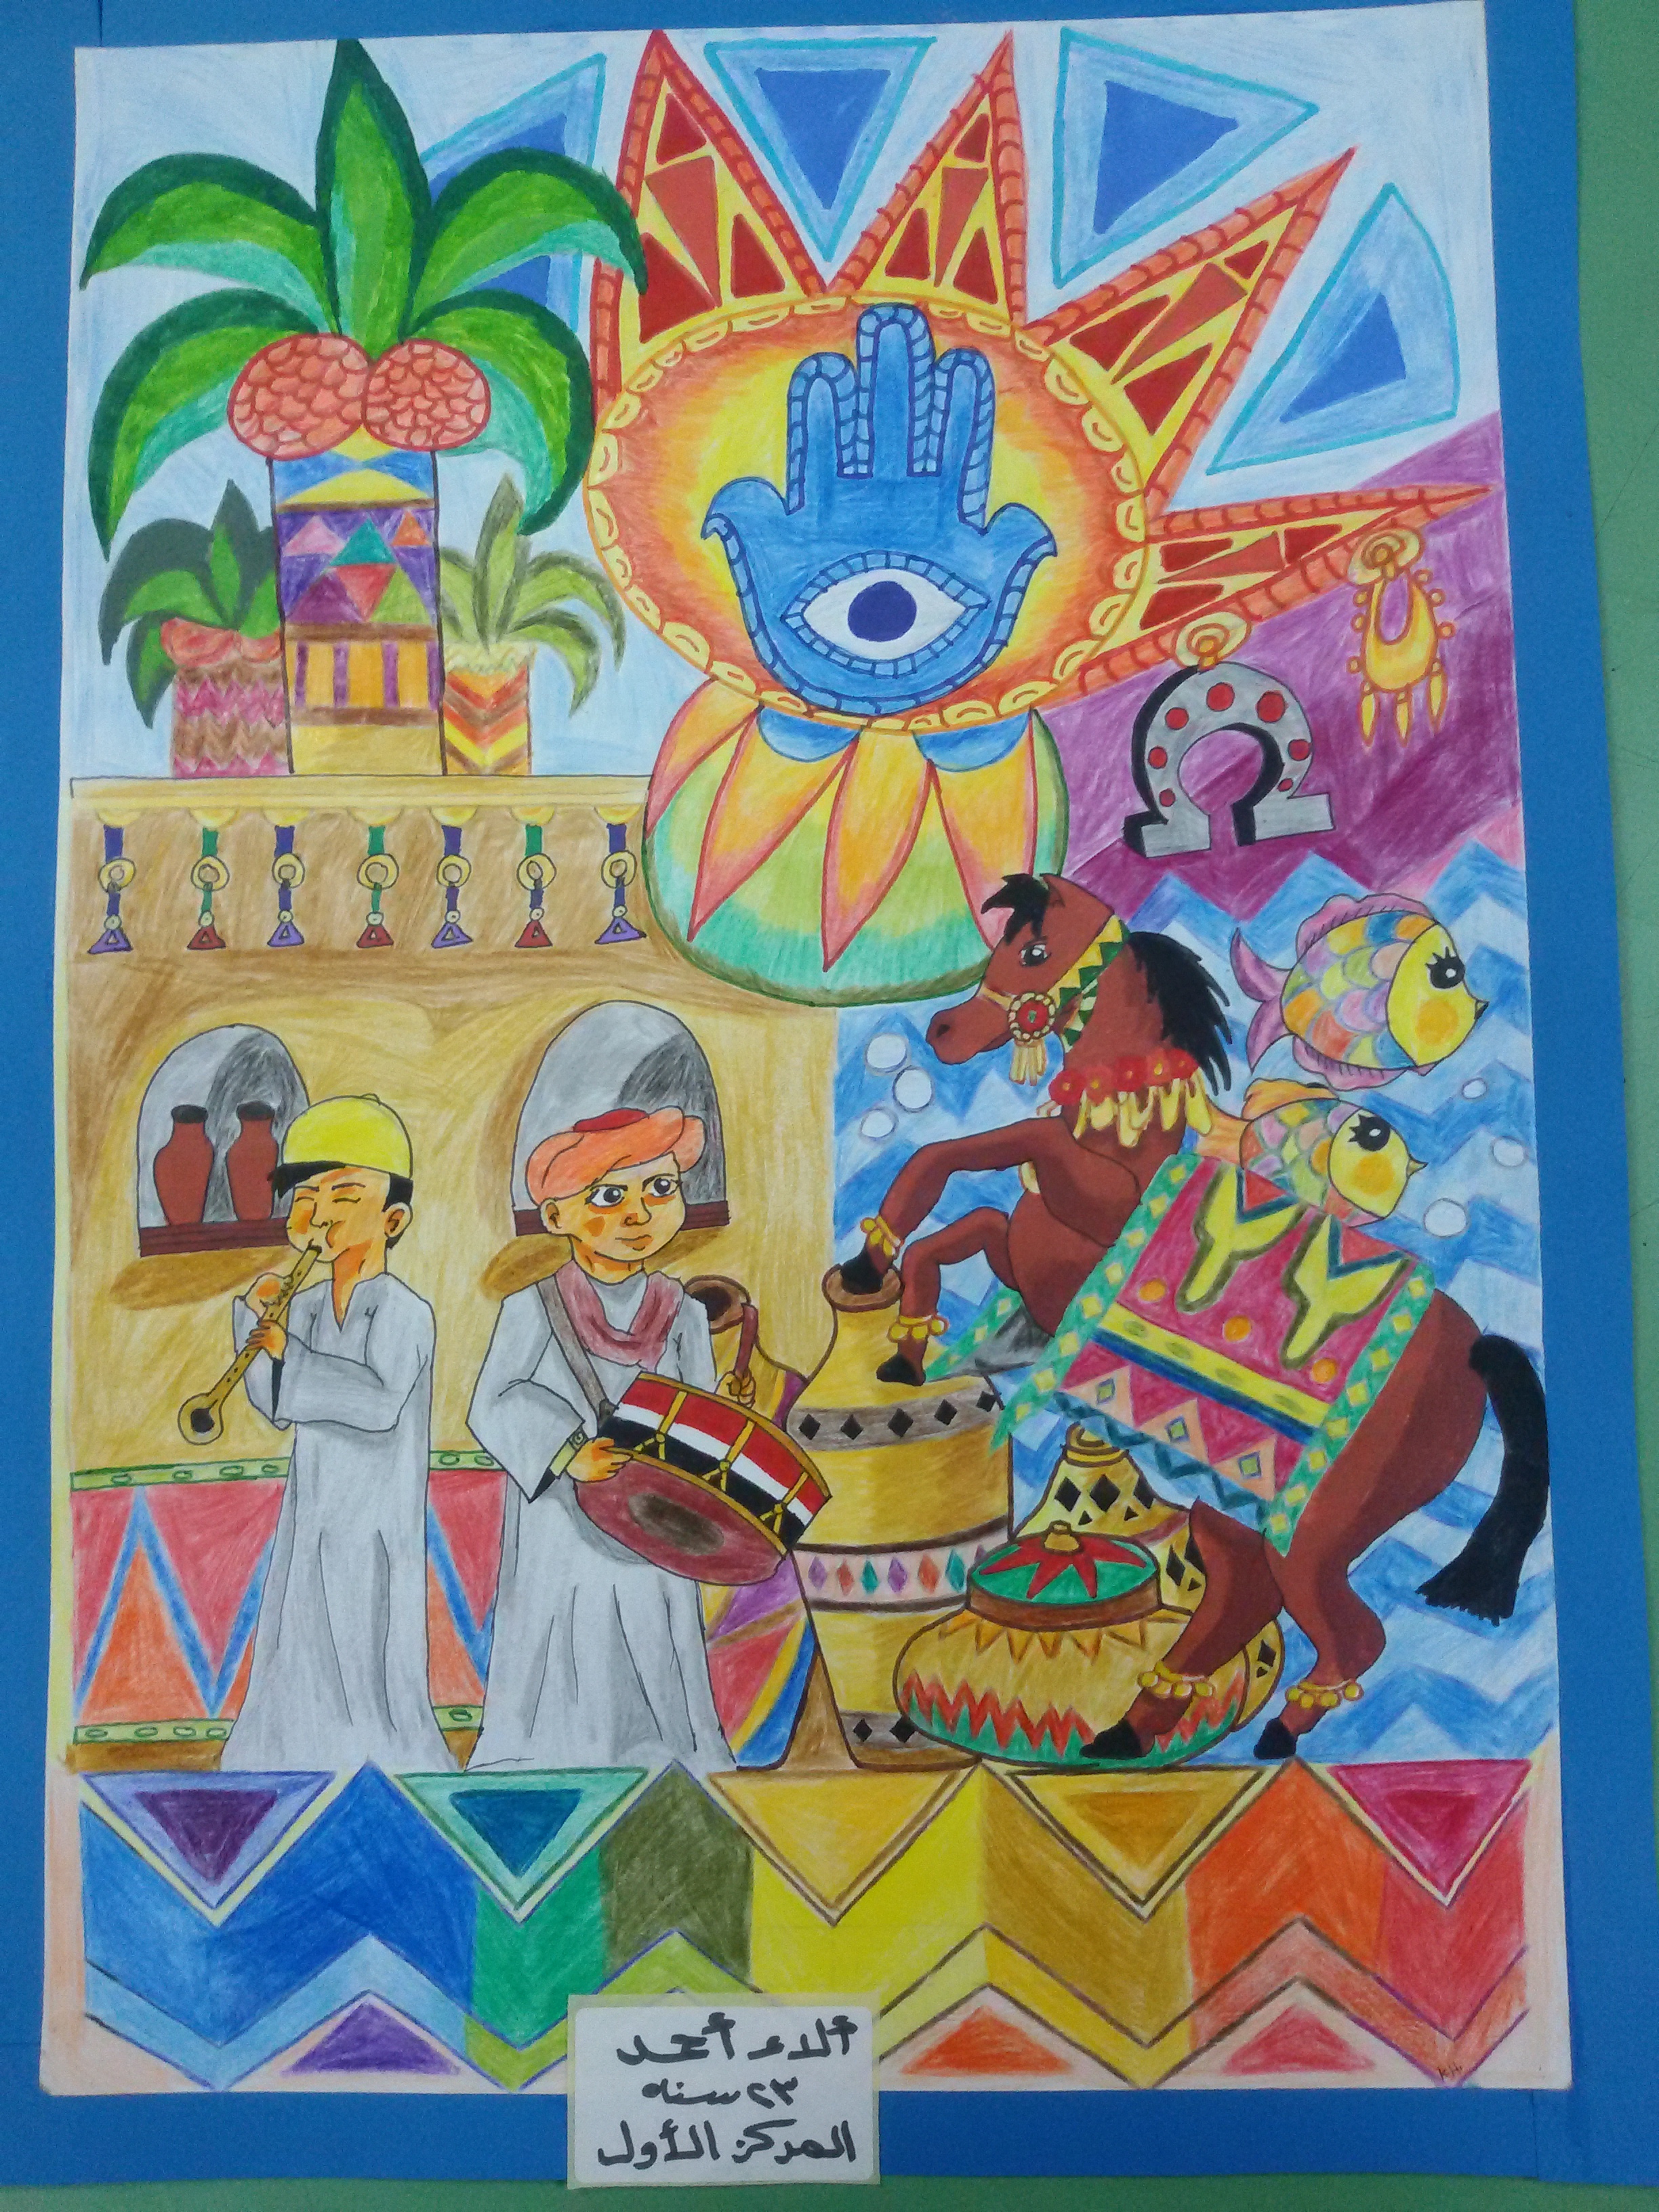 The winners'art works in the Art competition "Shaabeyat"